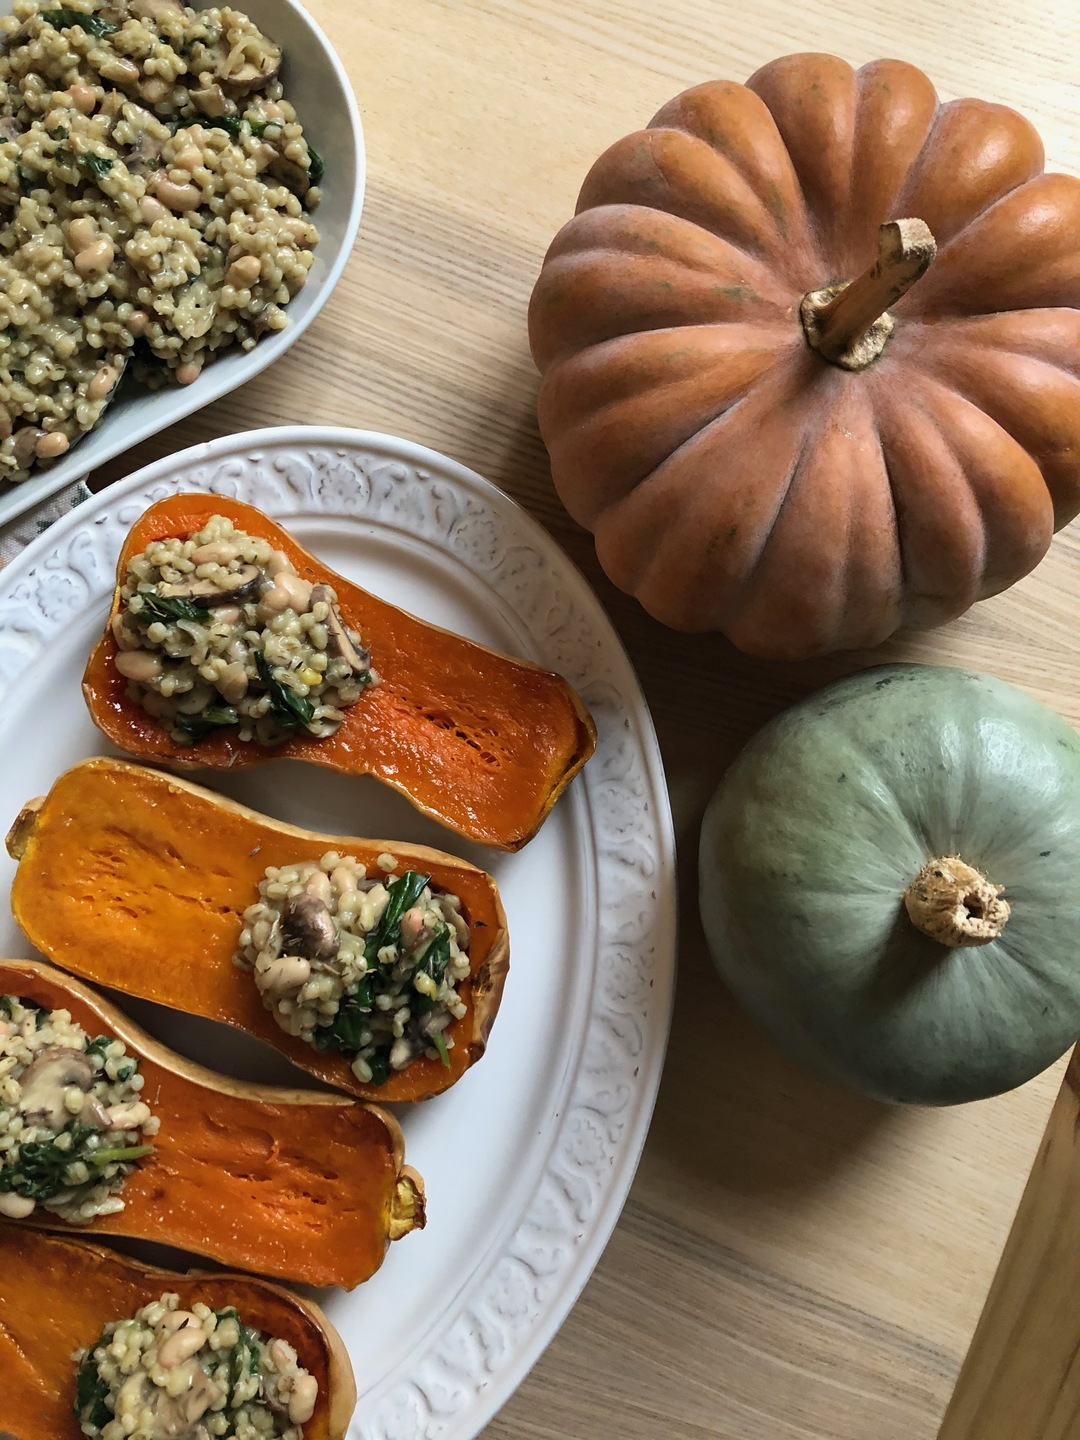 Butternut squash stuffed with barley risotto and mushrooms